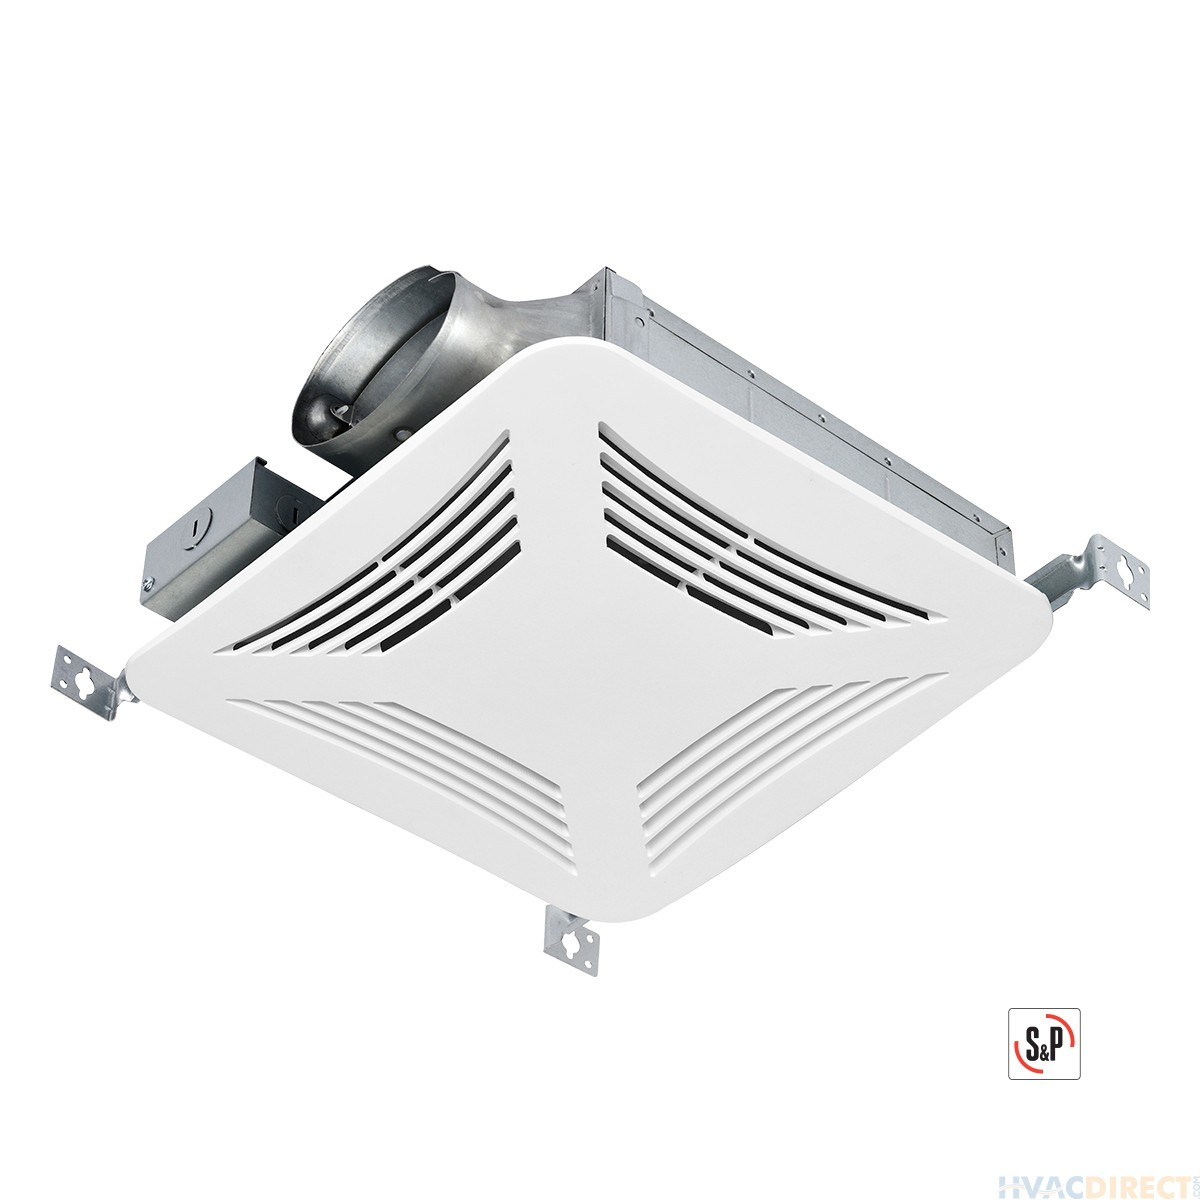 Sp Premium Choice Ceiling Mounted Bathroom Exhaust Fan 100 Cfm Pclp100 within size 1200 X 1200